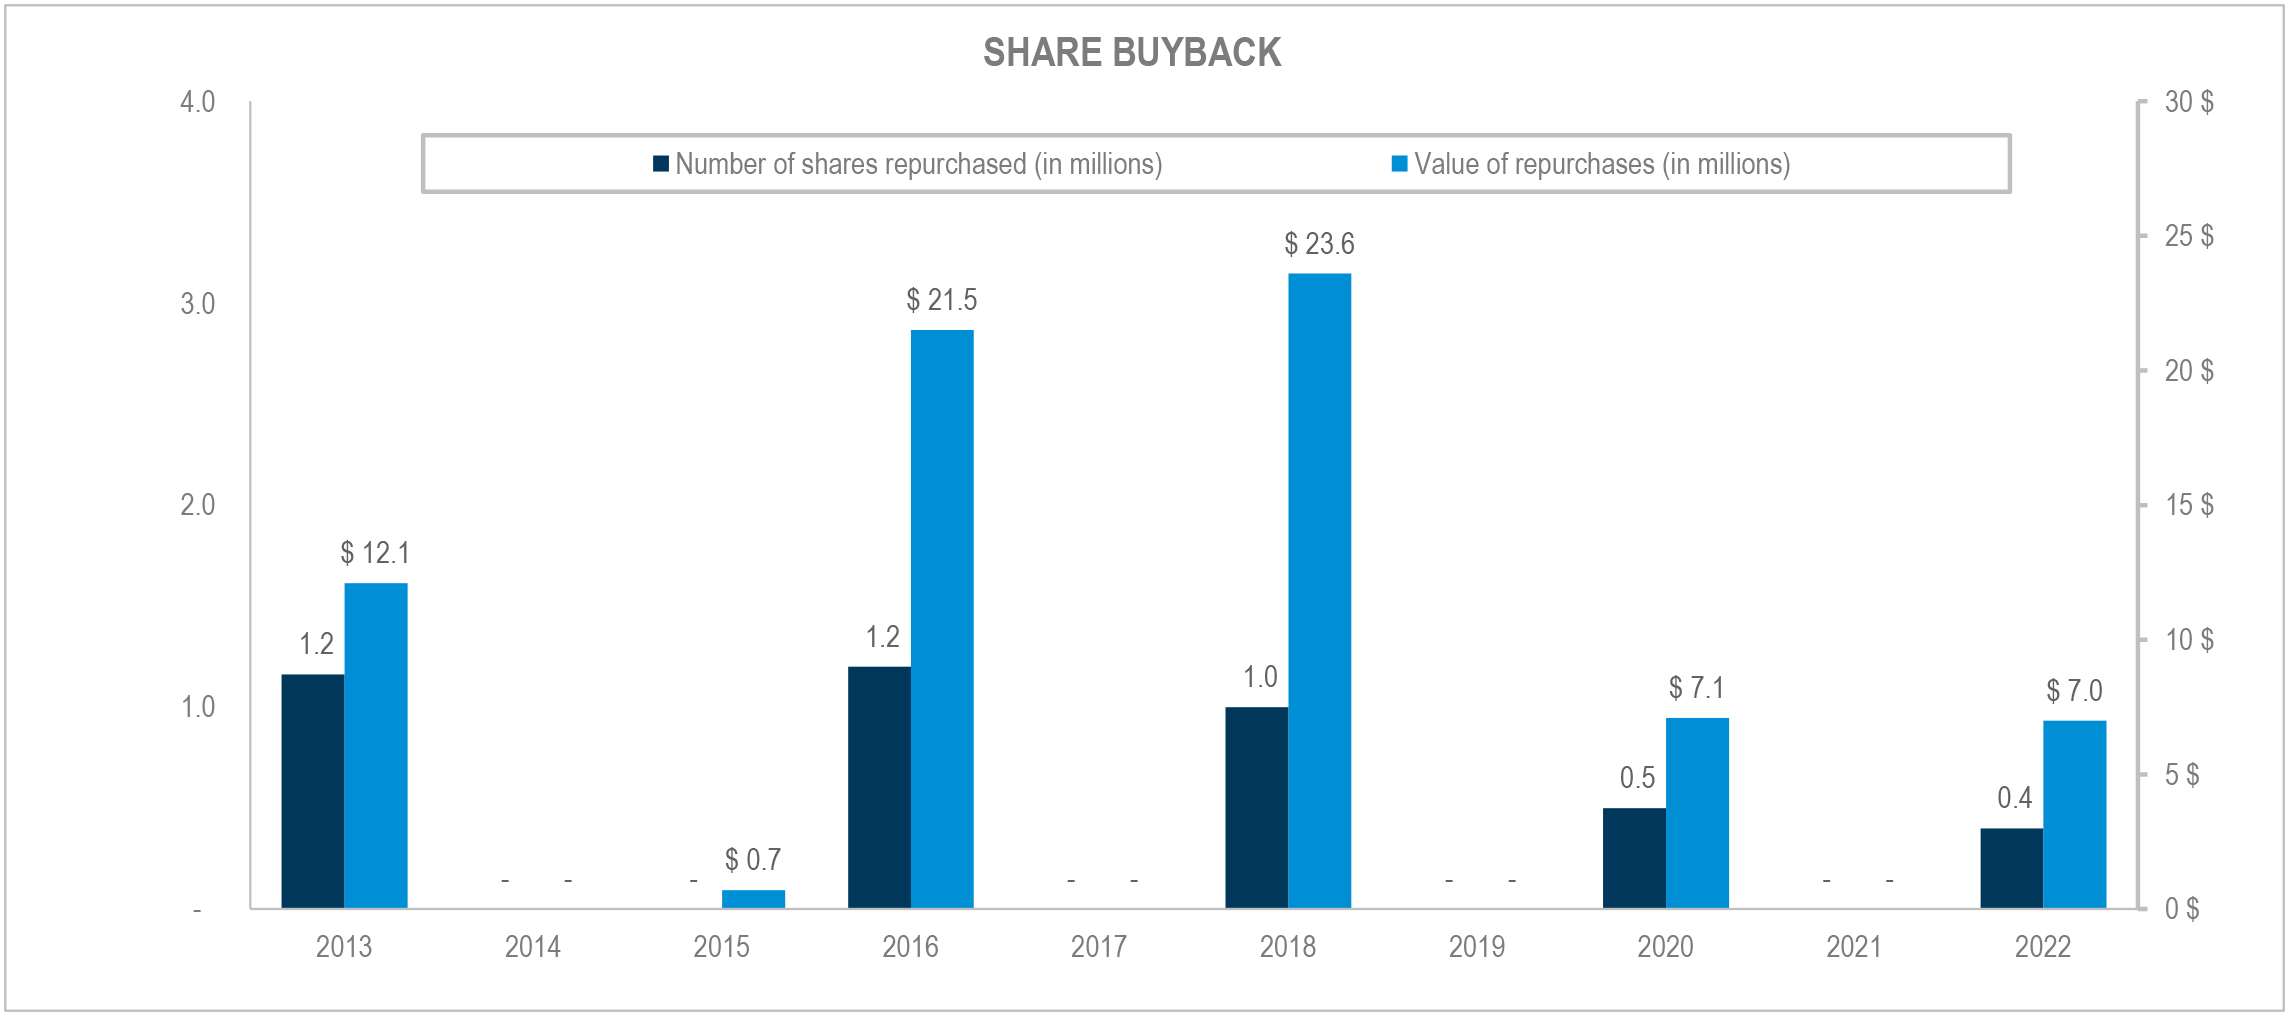 Q4 Share Buyback